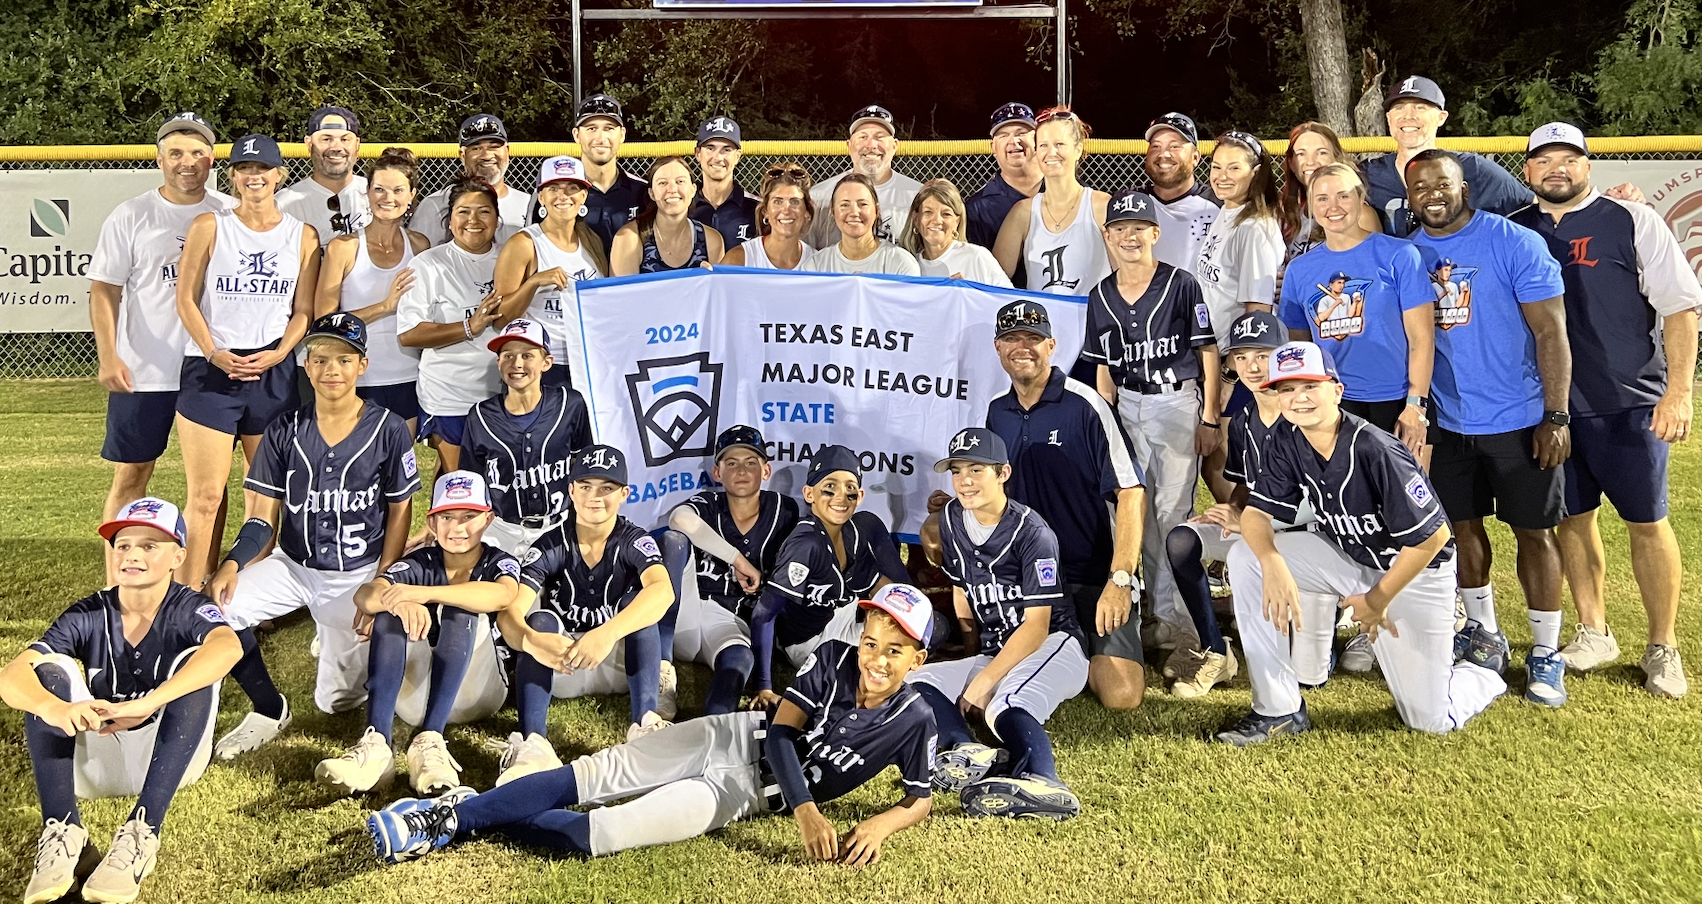 Houston-area team looking to make a run at Little League World Series